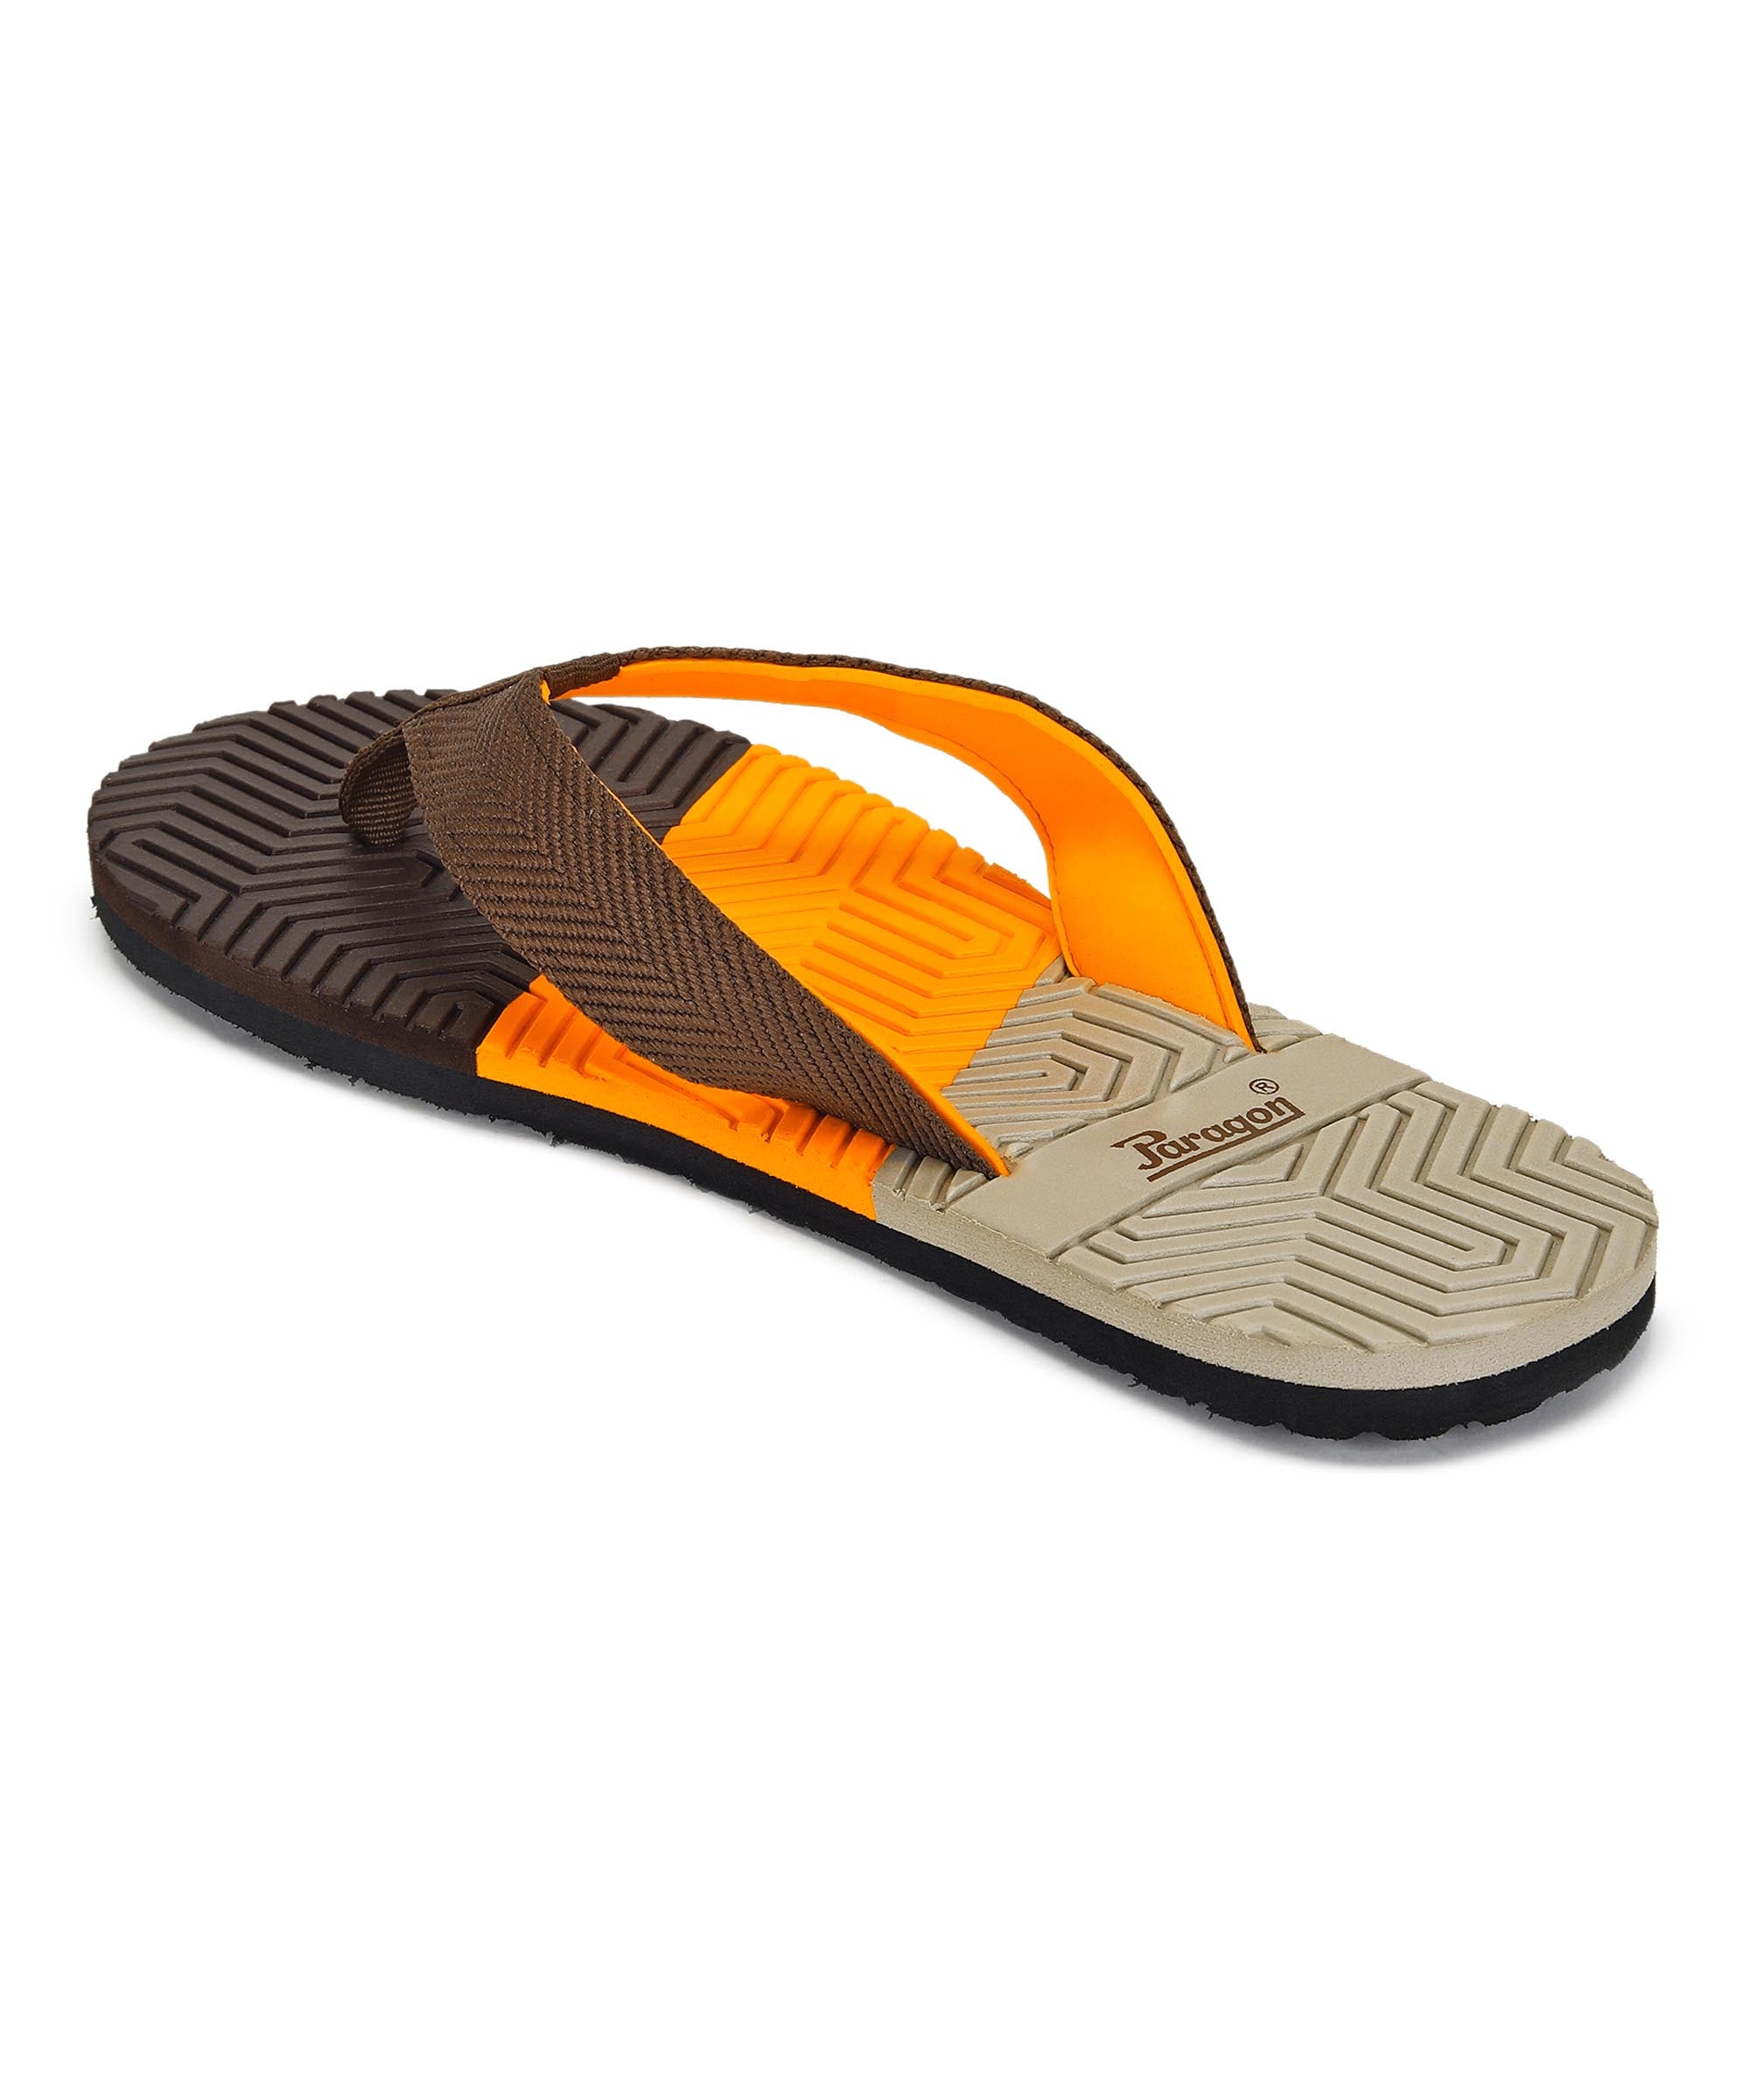 Paragon K3311G Men Stylish Flip Flops | Comfortable Flip Flops for Daily Use | Lightweight and Easy to Wash